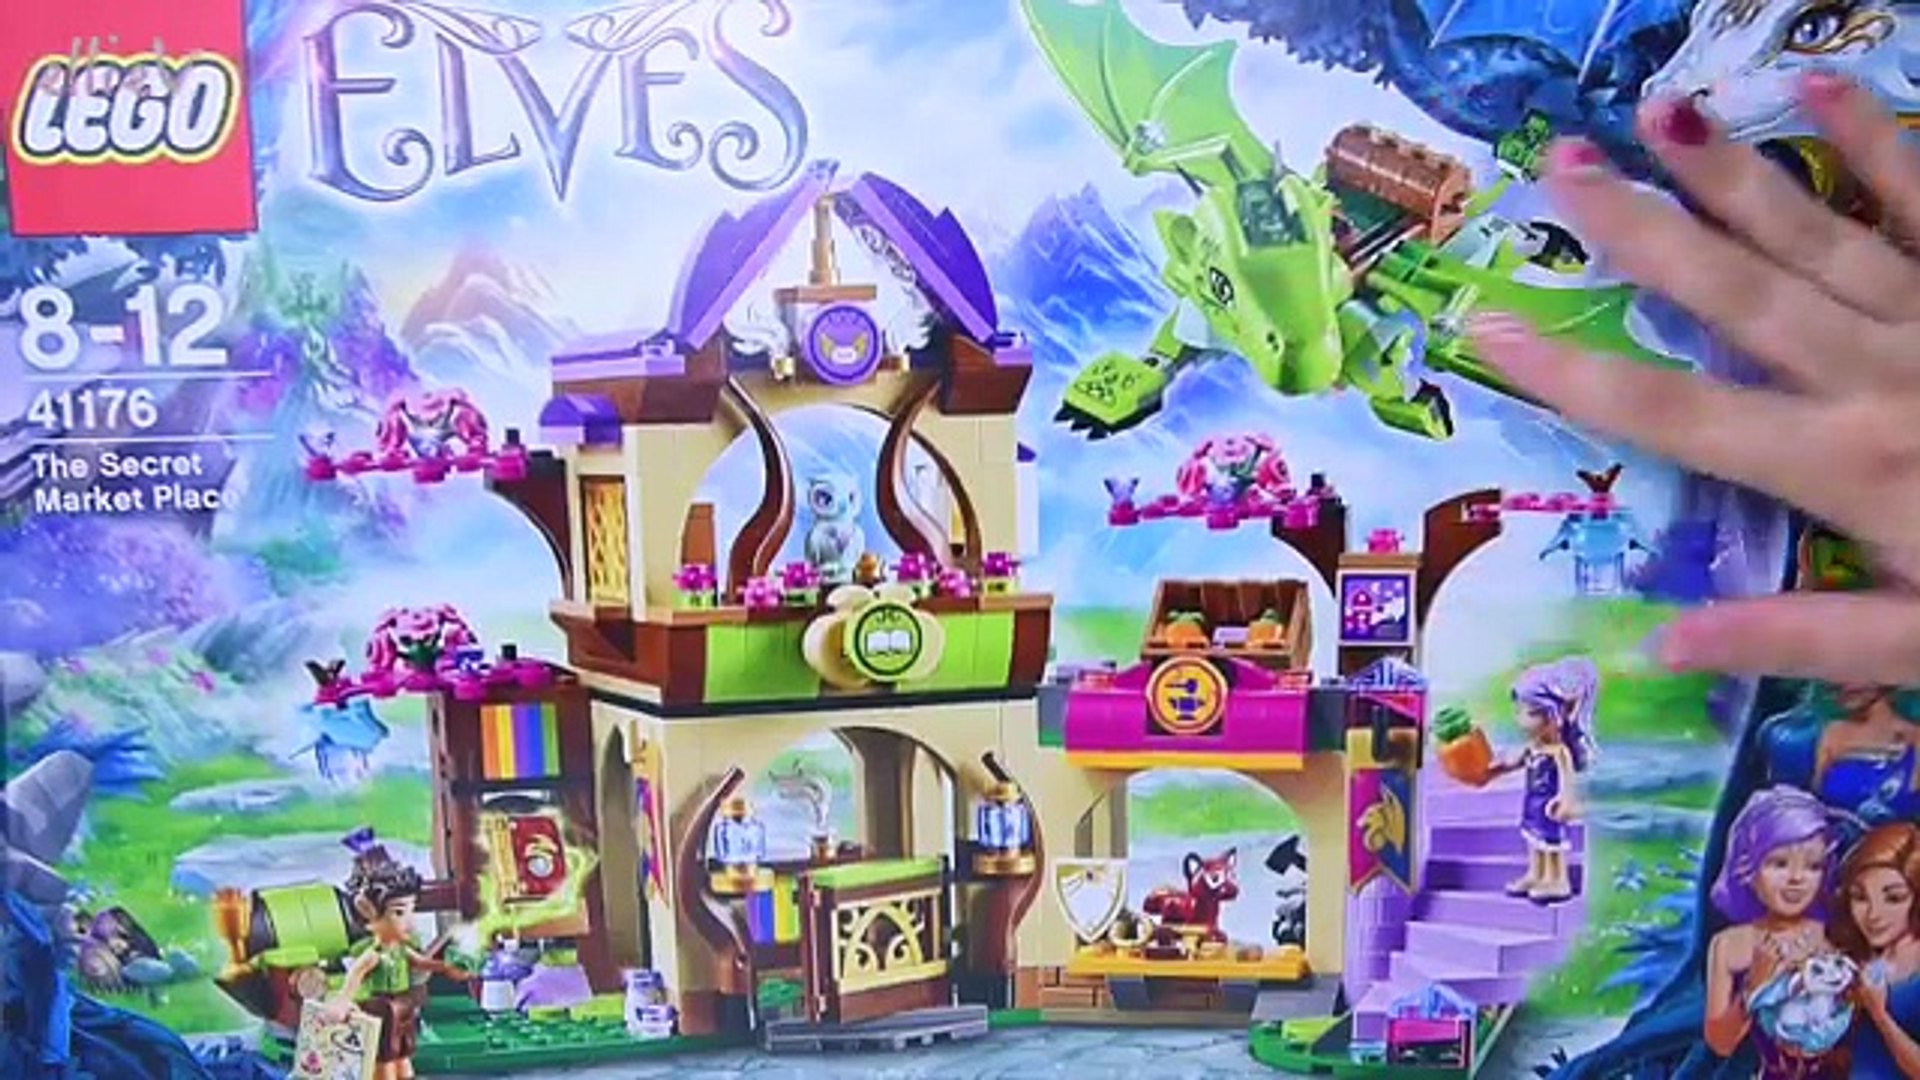 Lego Elves Green Earth Dragon The Secret Market Place Set Build Review -  Kids Toys - video Dailymotion